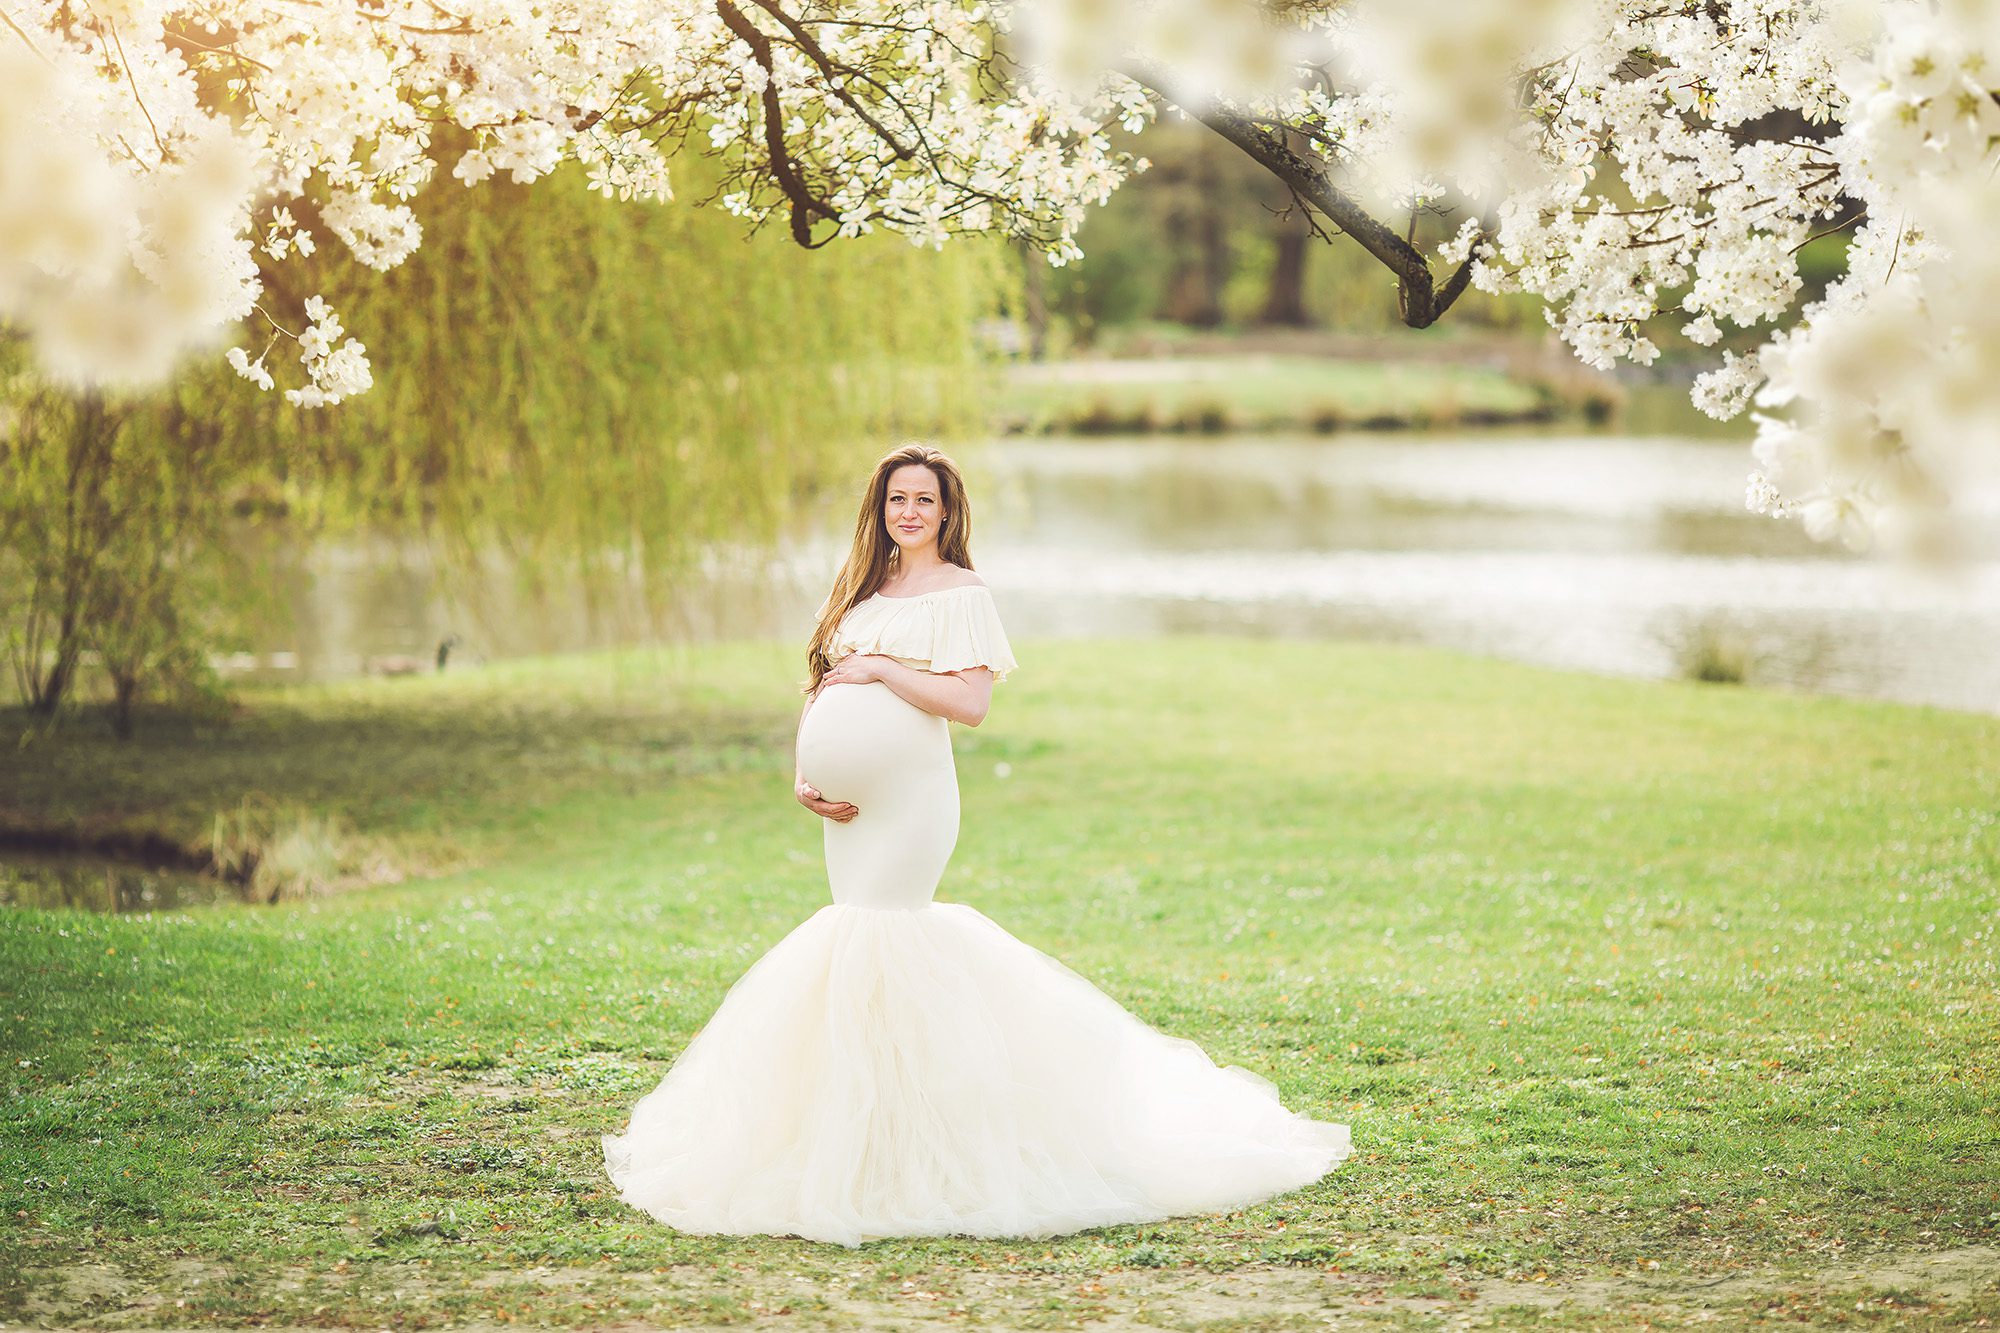 Frankfurt maternity photographer captures a gorgeous spring maternity session in Bad Homburg